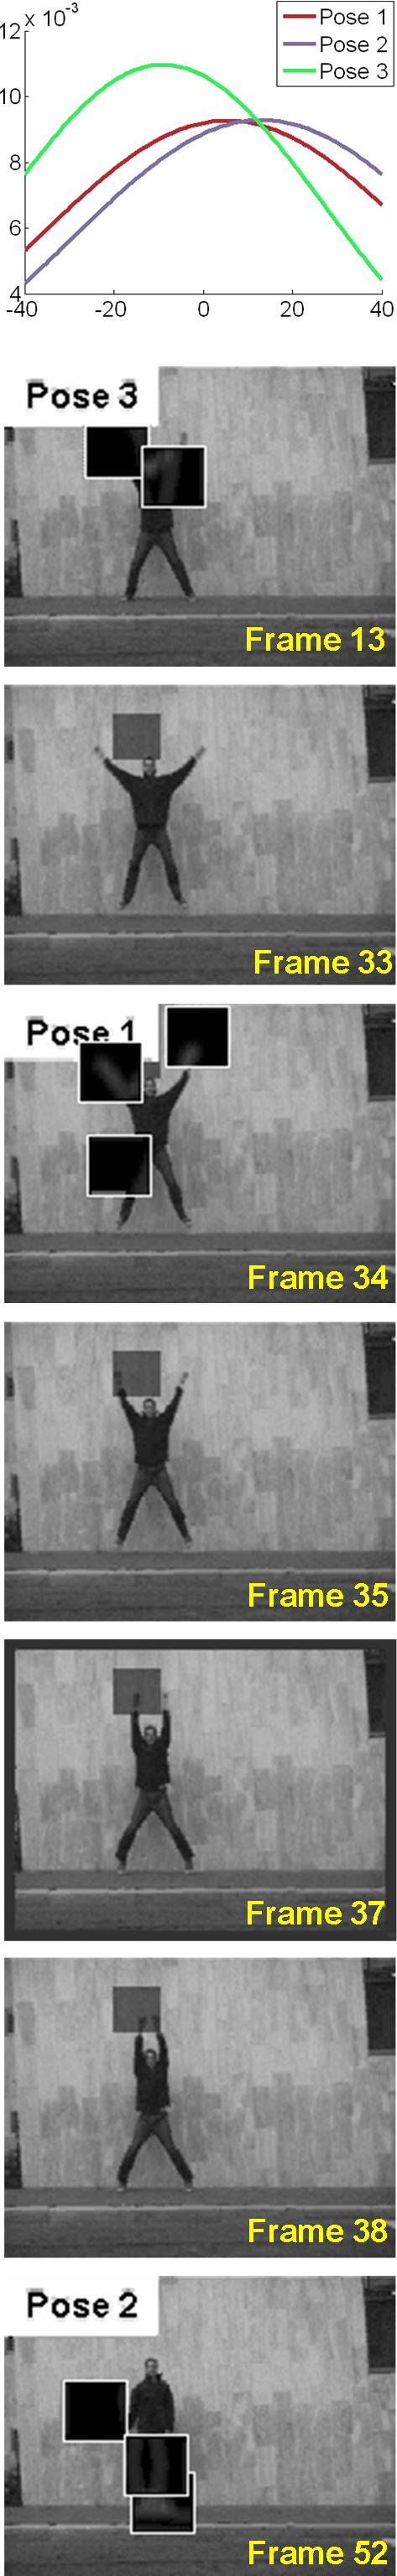 Figure 7. Learned motion models superimposed on the test sequences at the detected locations.